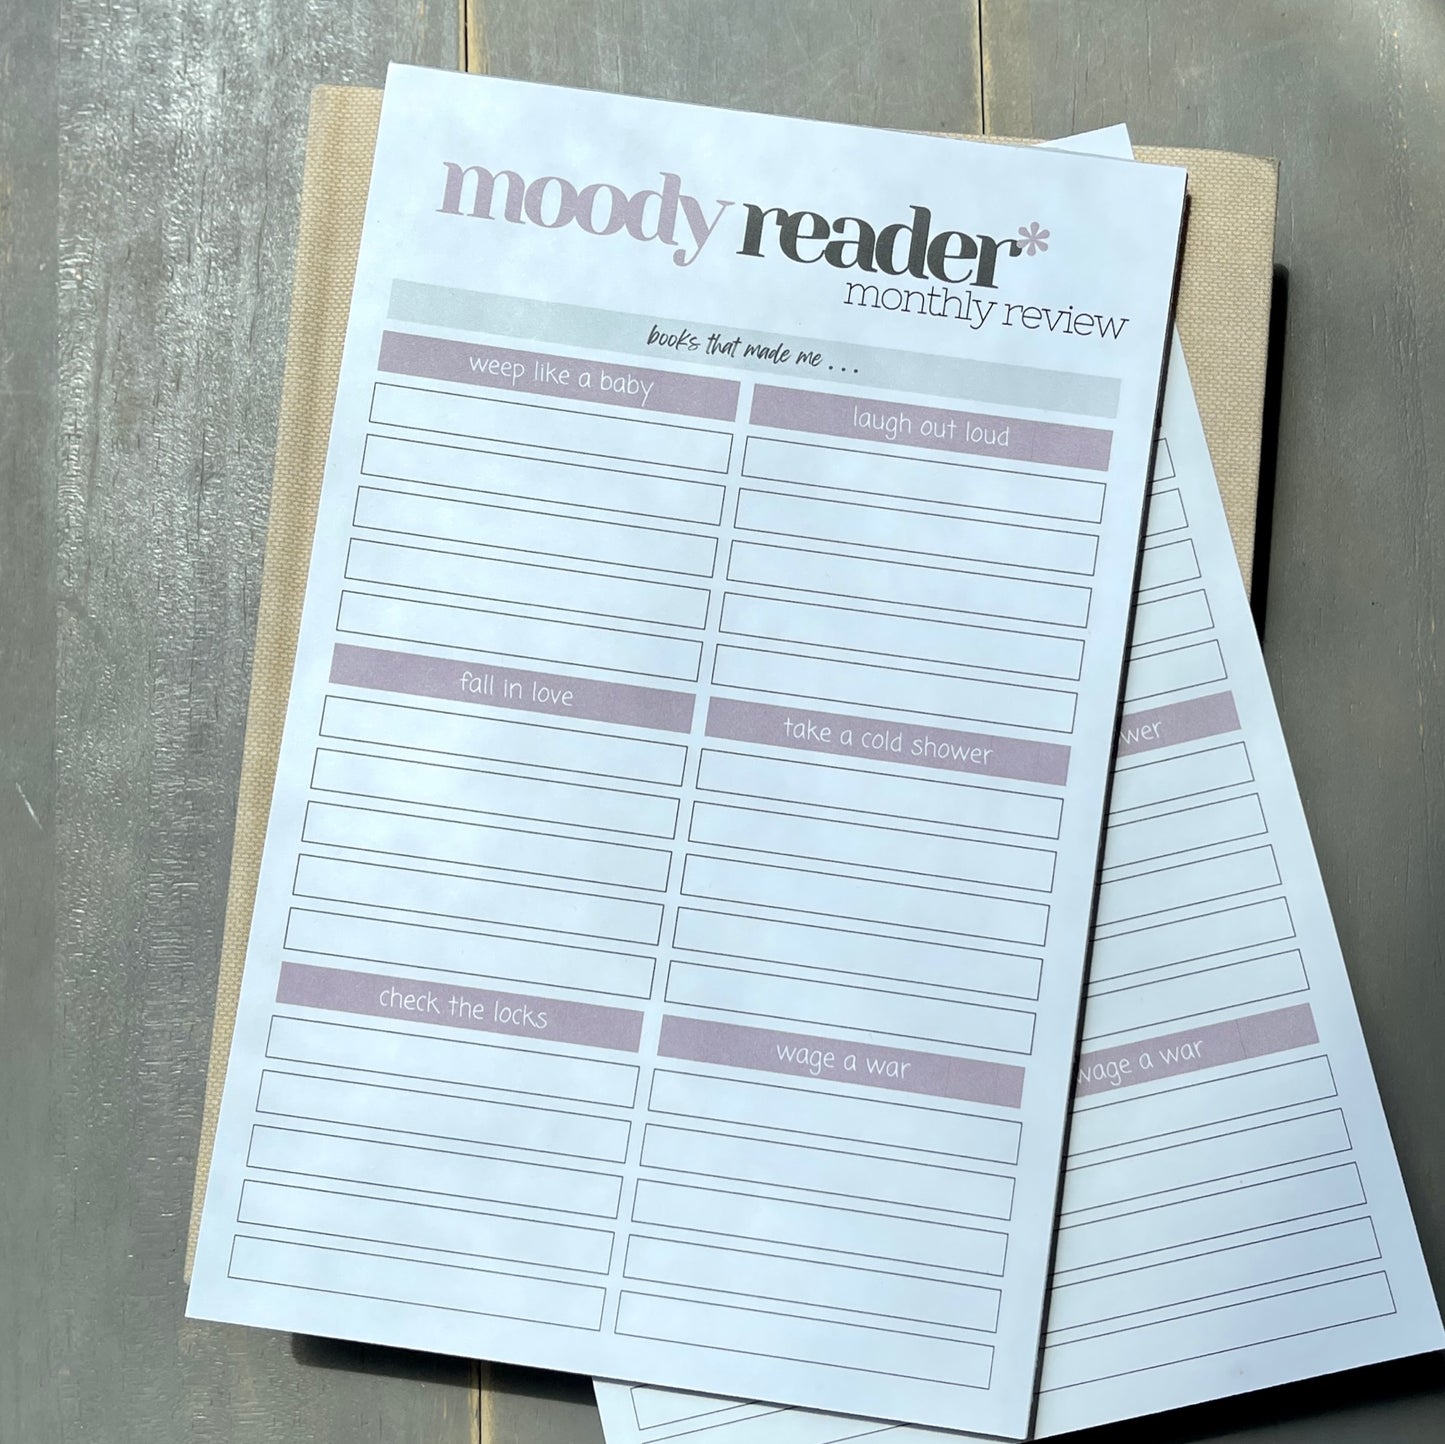 Moody Reader Monthly Review Pad